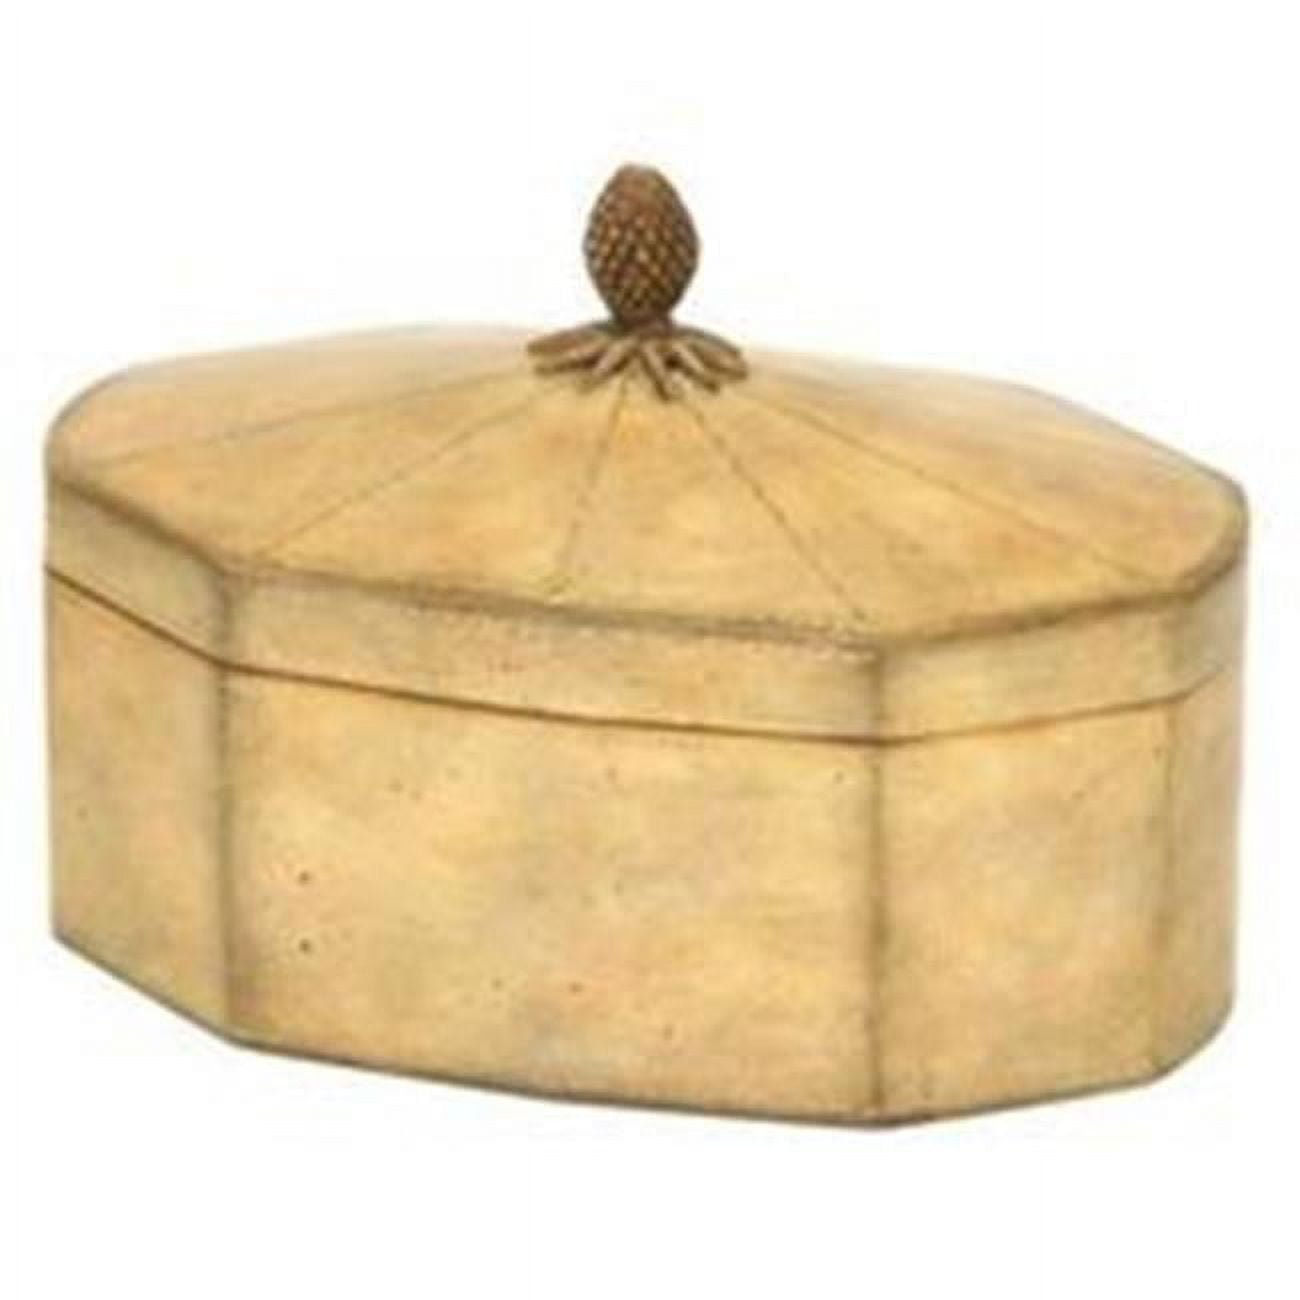 Distinctive Designs Db-263a Ivory Leather Decagon Box With Lid & Pineapple Finial